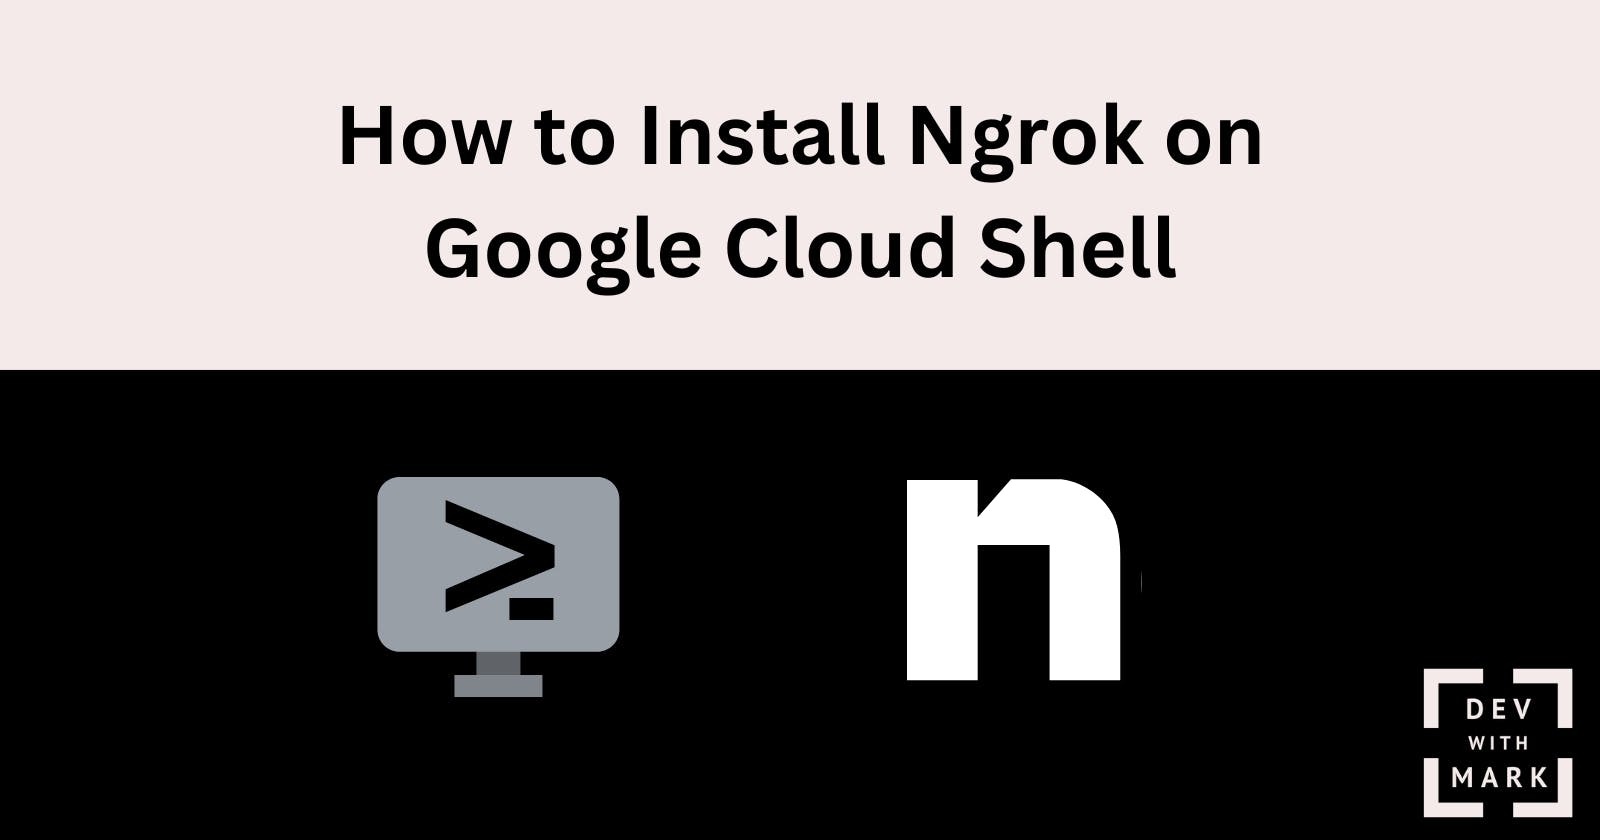 How to Install Ngrok on Google Cloud Shell